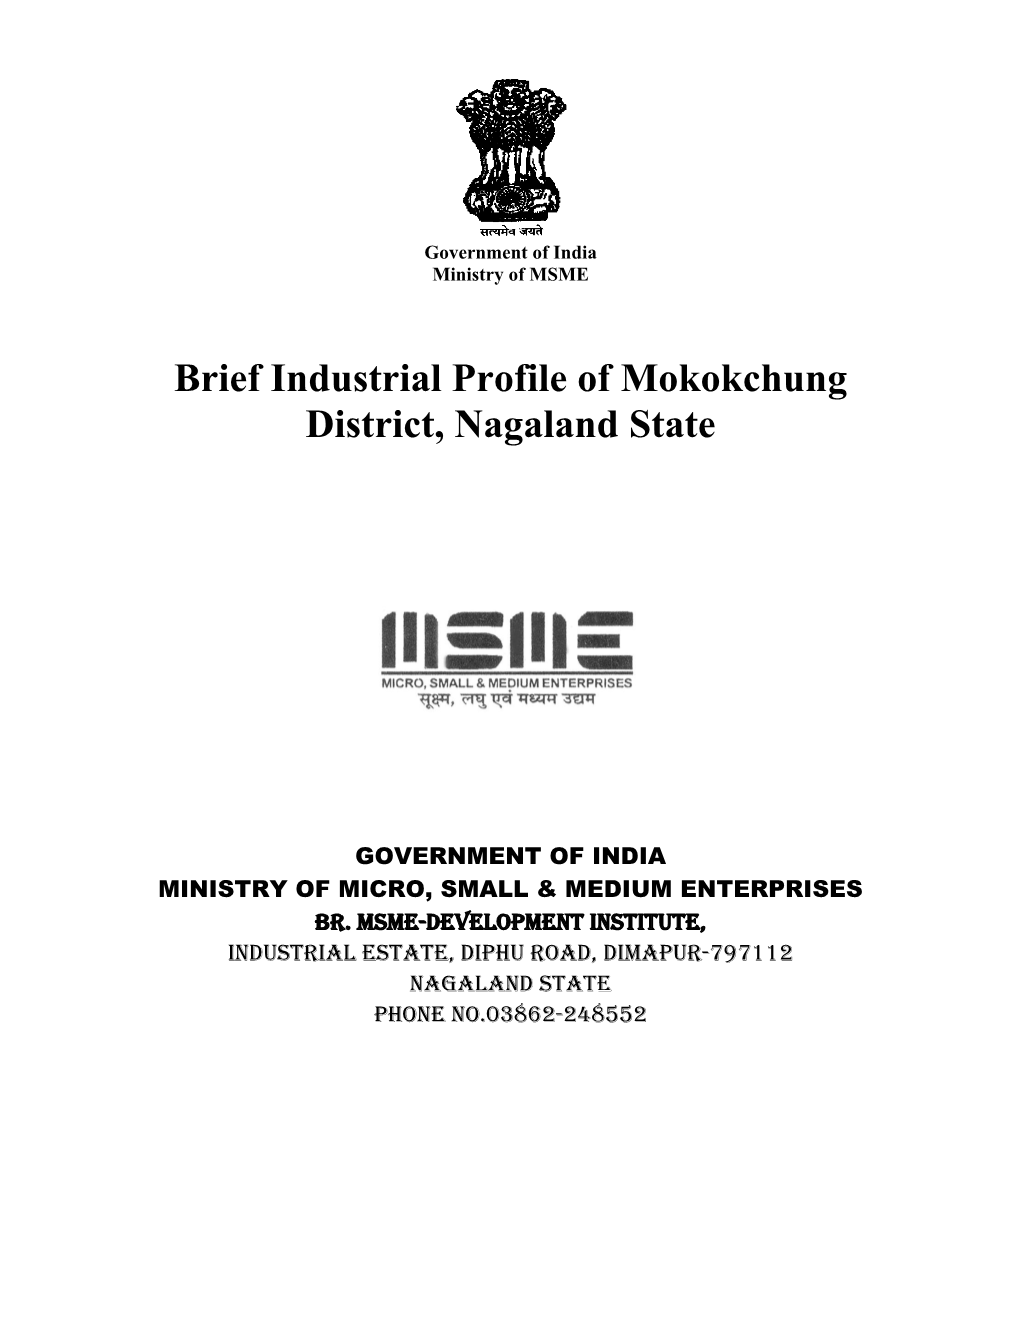 Brief Industrial Profile of Mokokchung District, Nagaland State